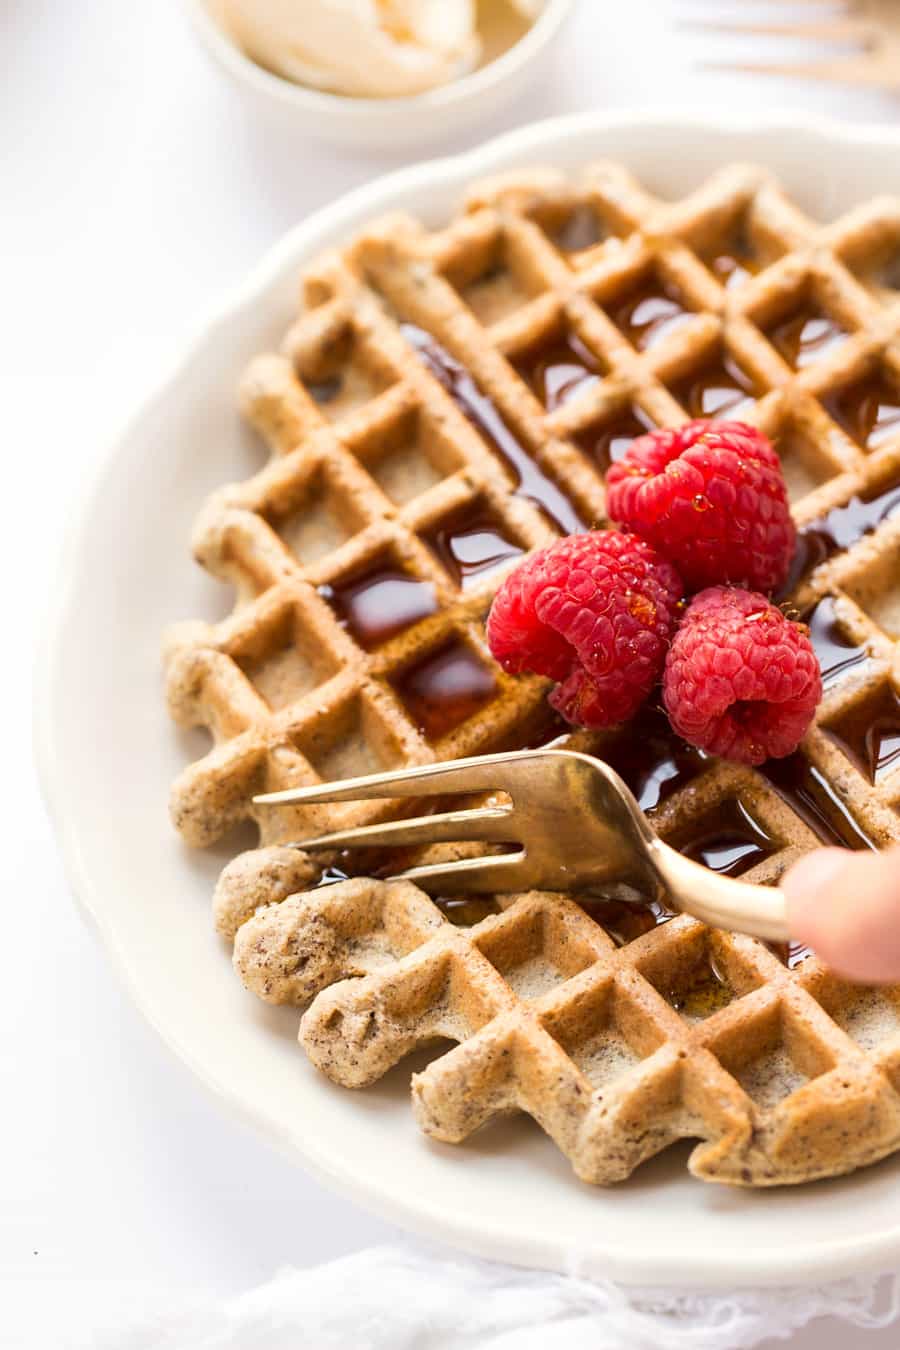 The ULTIMATE Almond Flour Waffles recipe - made with almond flour, quinoa flour and flaxseed meal, these wholesome waffles are light, fluffy and totally healthy!